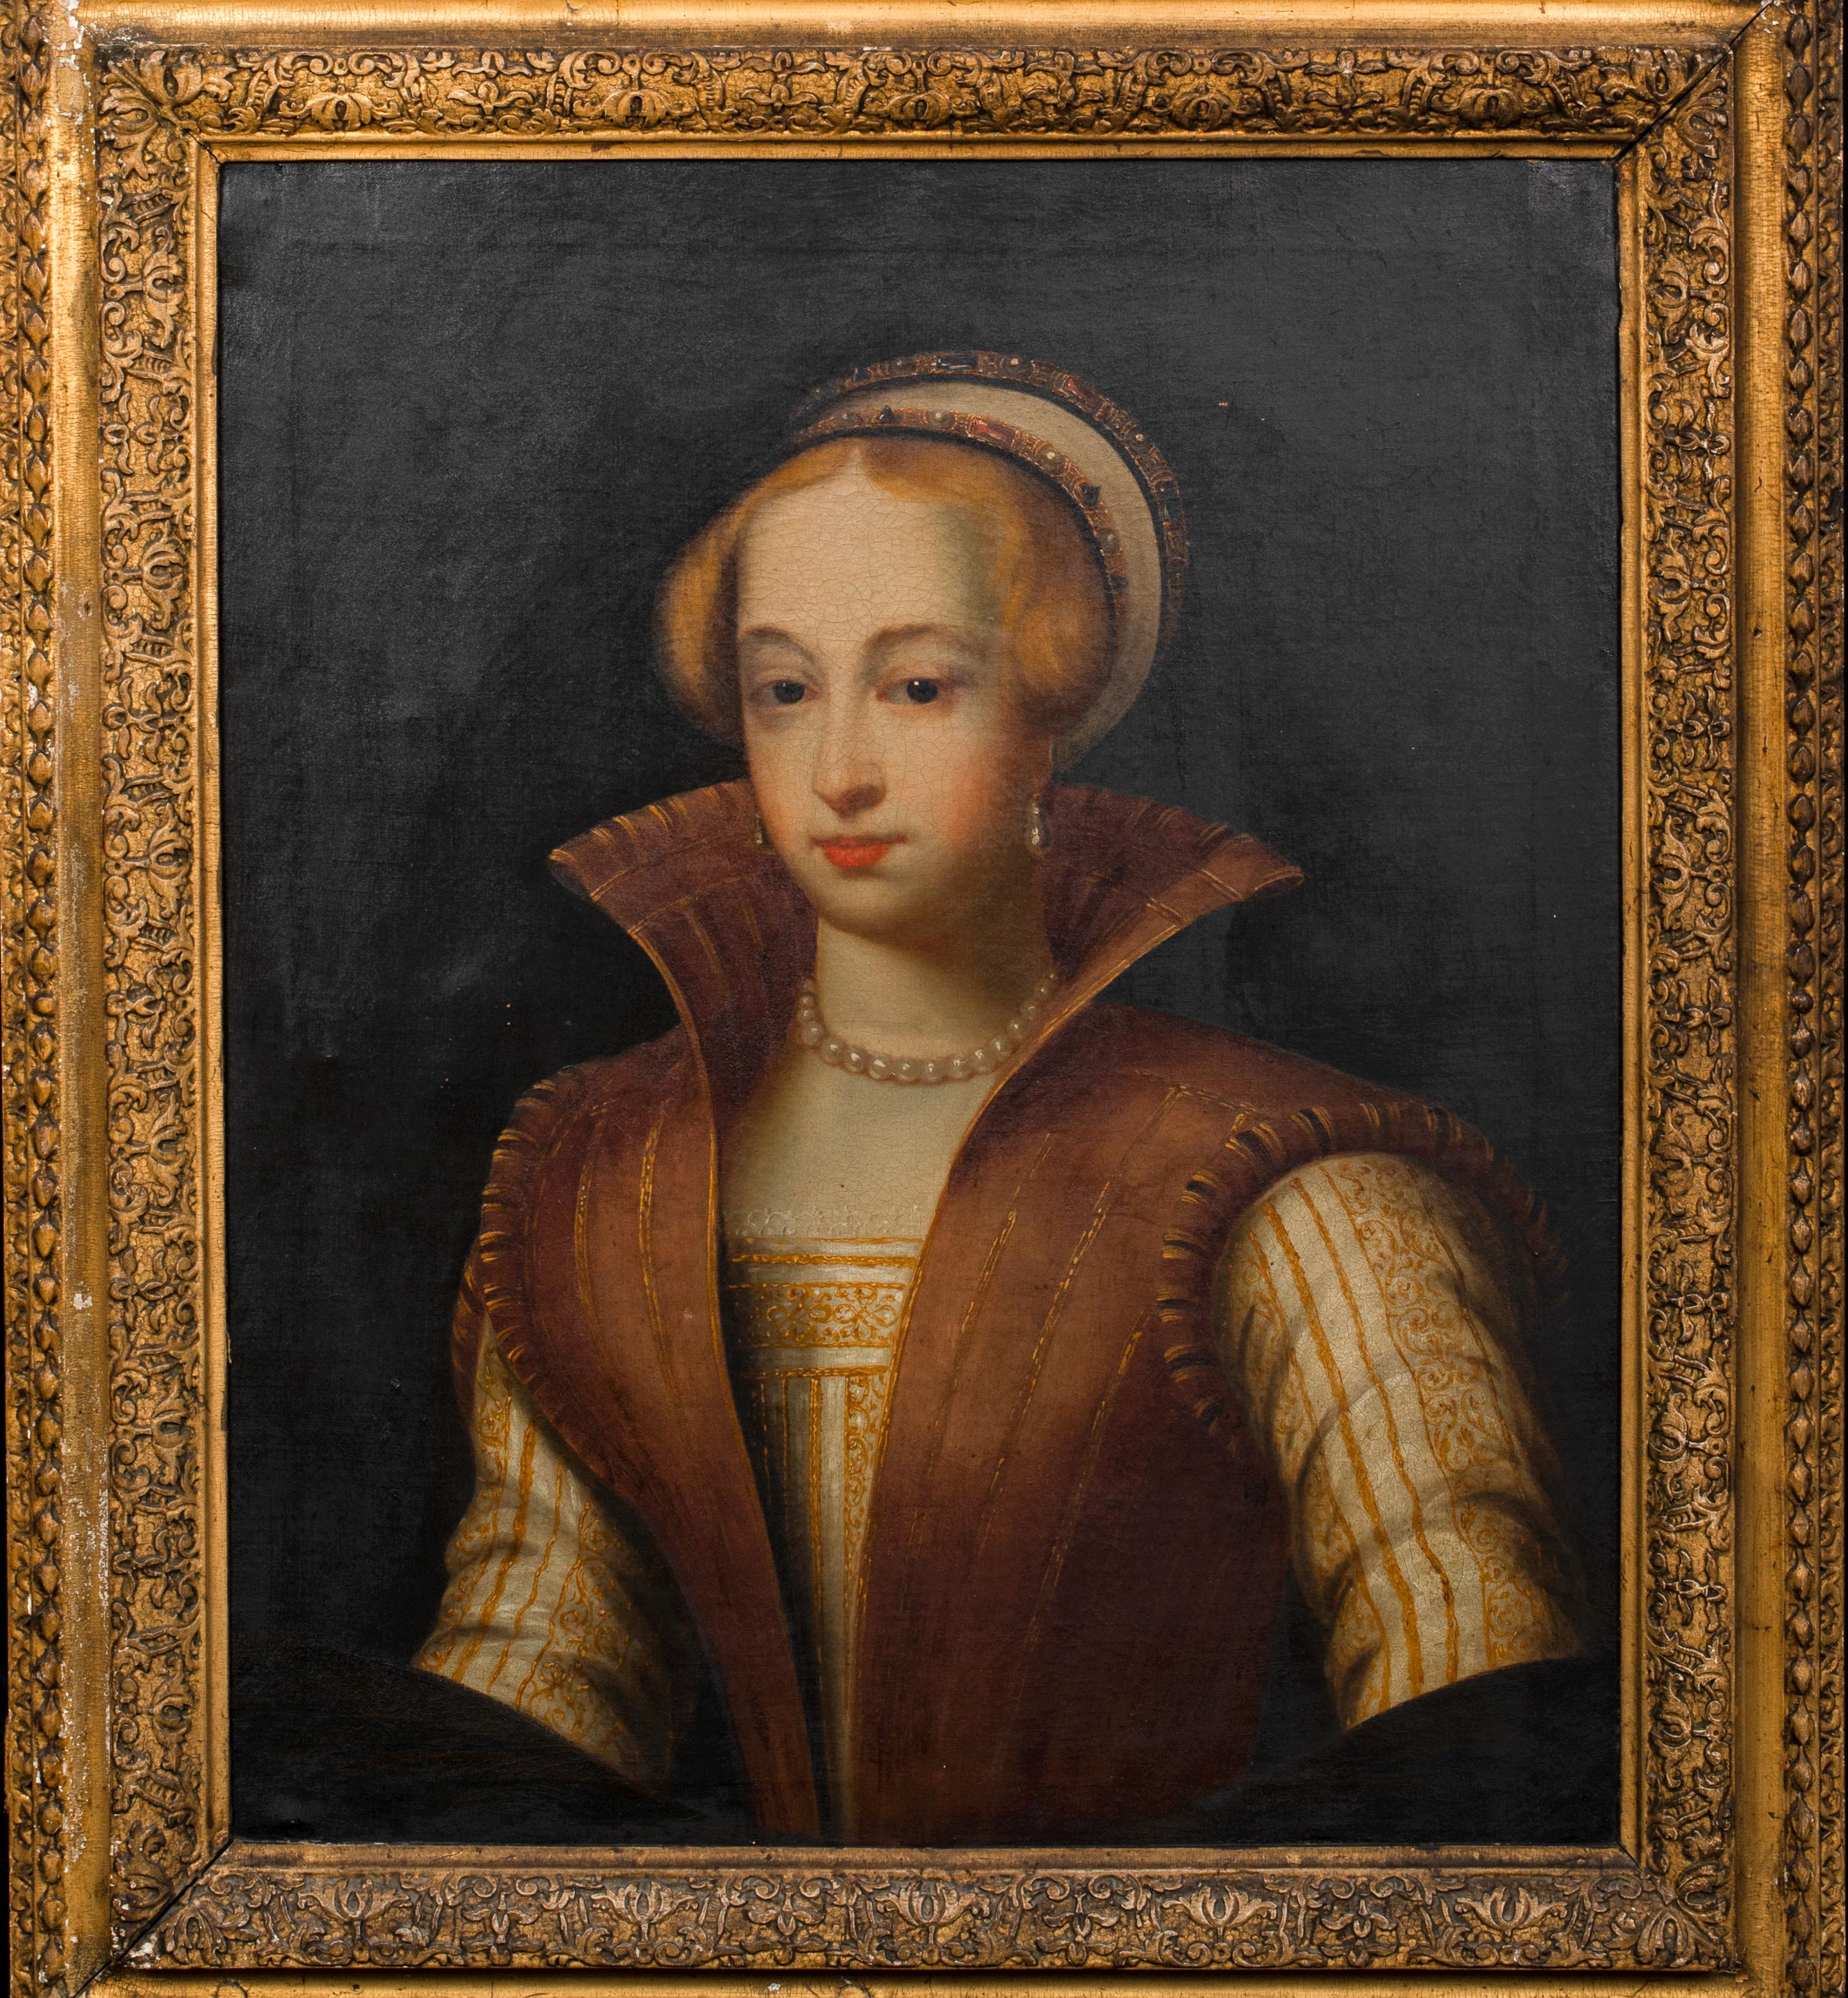 Unknown Portrait Painting - Portrait Of Queen Mary I Of England (1516-1558), 17th Century  